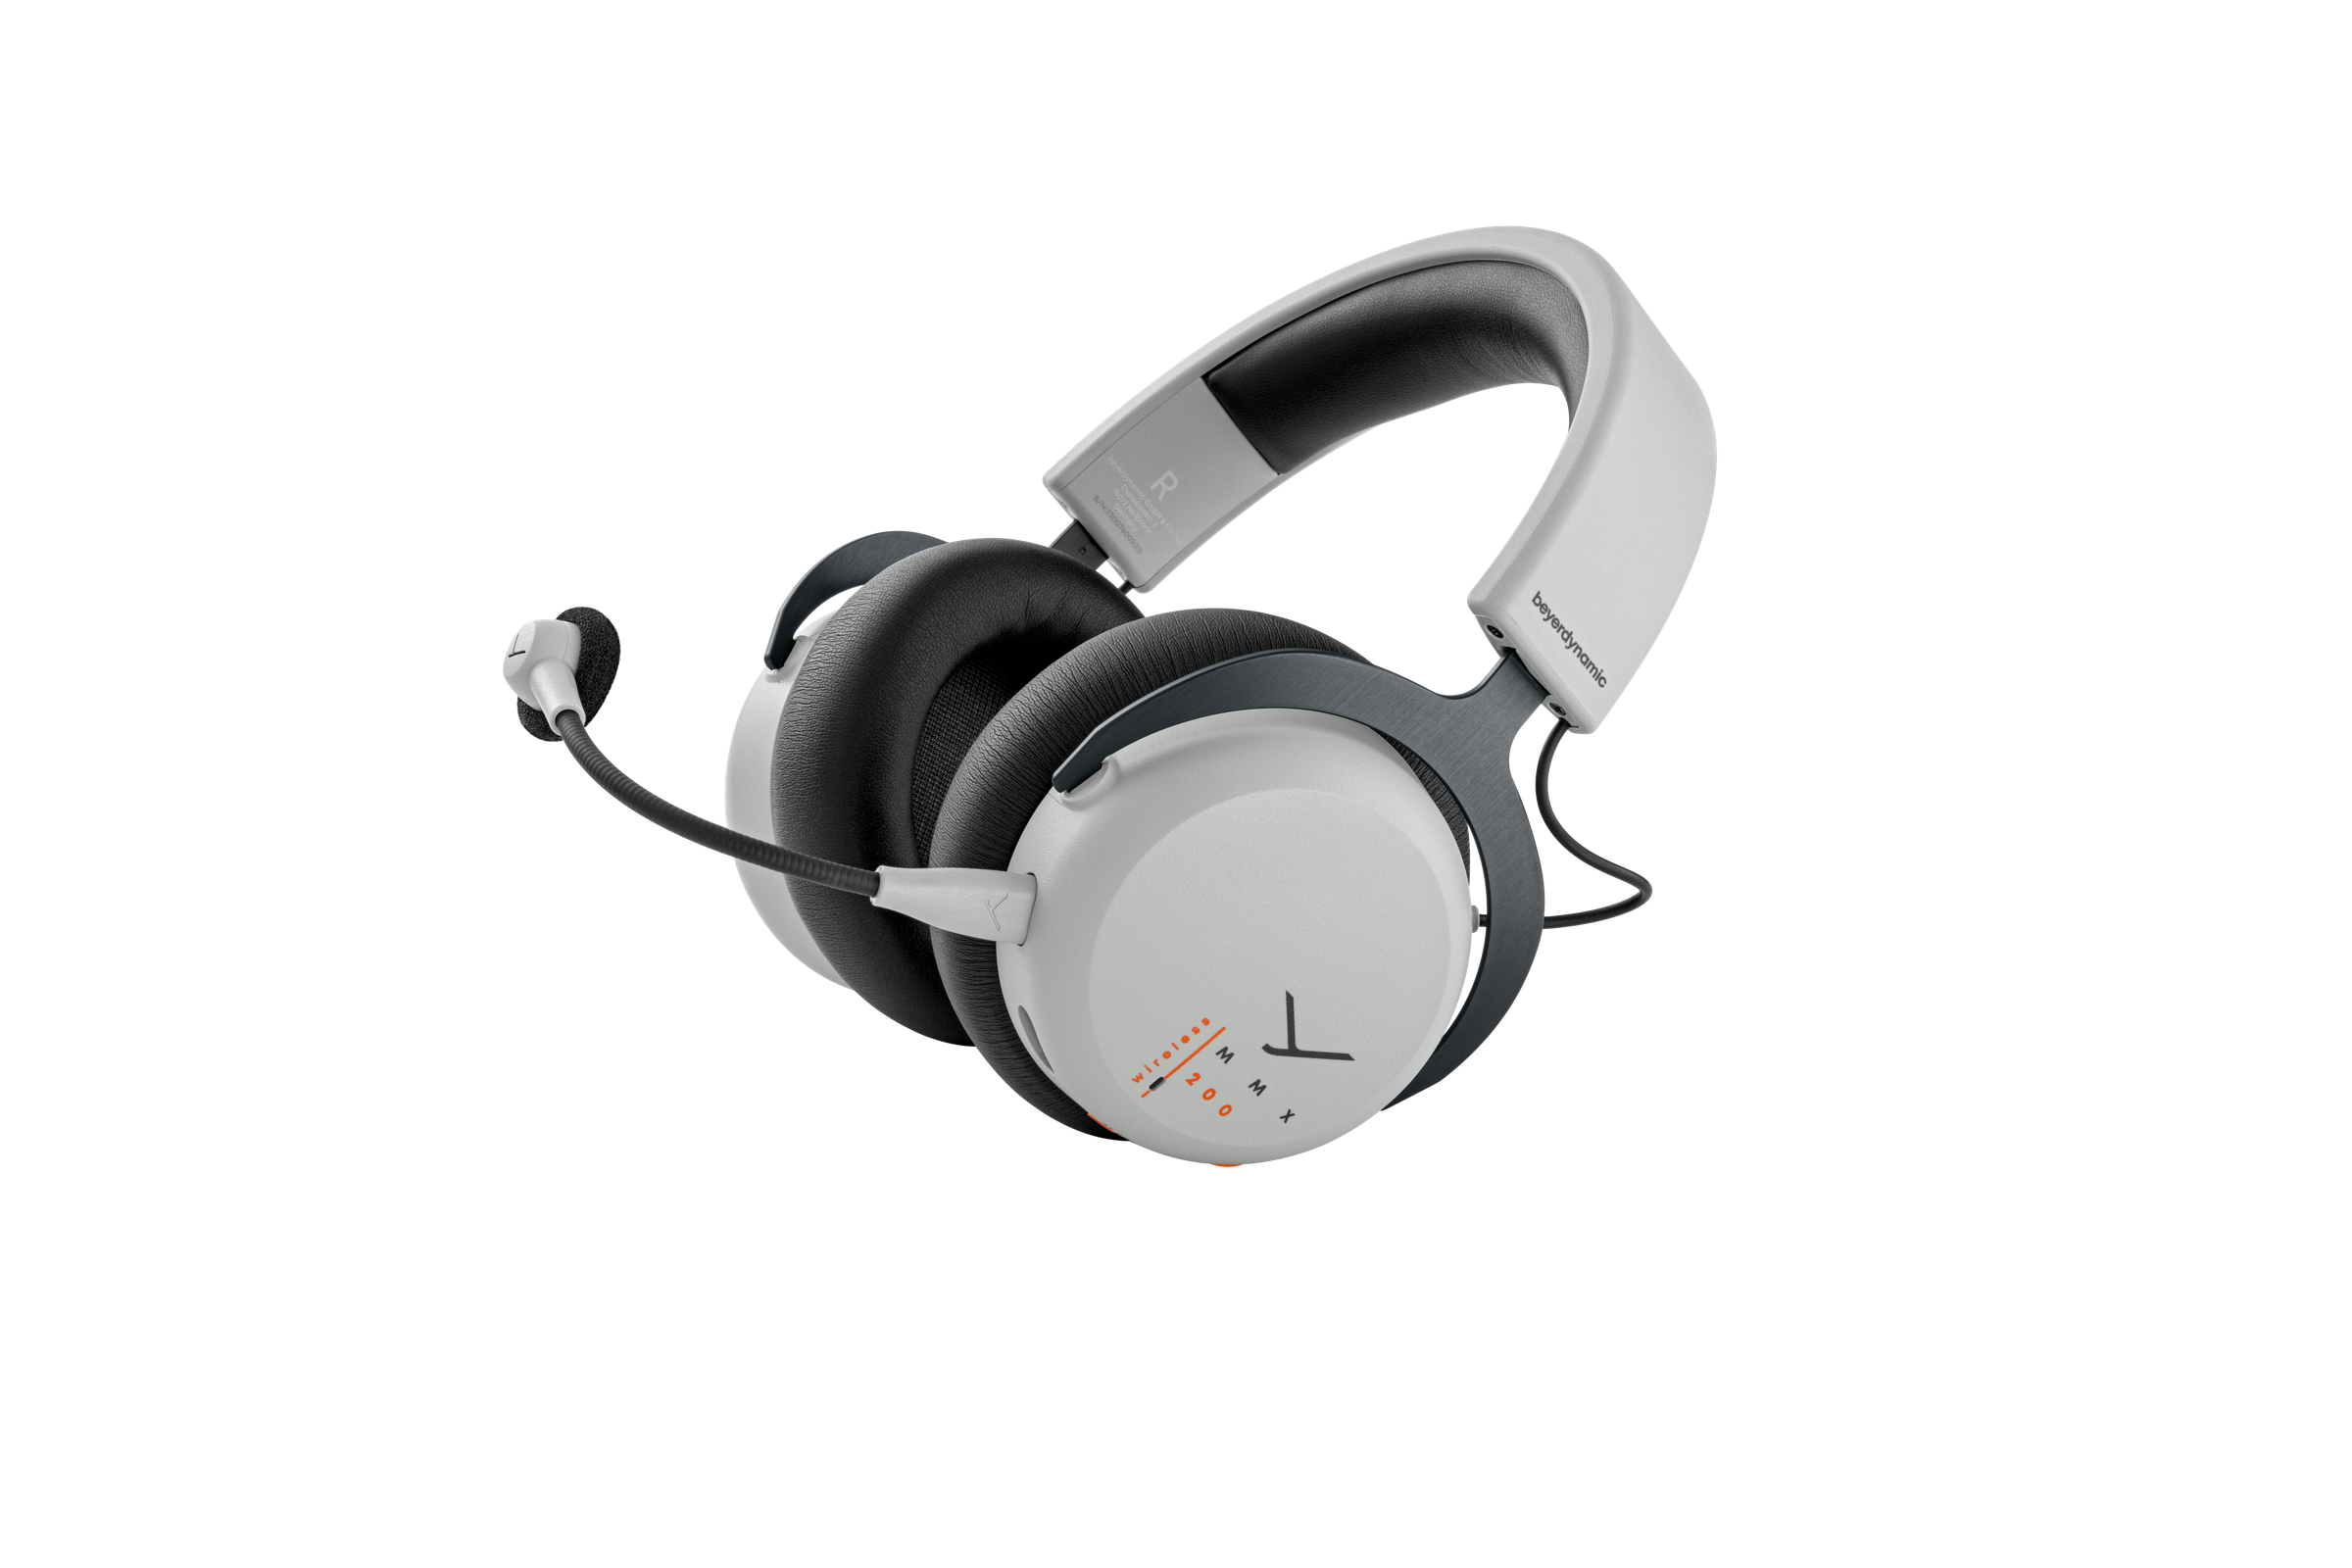 The Beyerdynamic MMX 200 wireless gaming headset in gray on a white background.